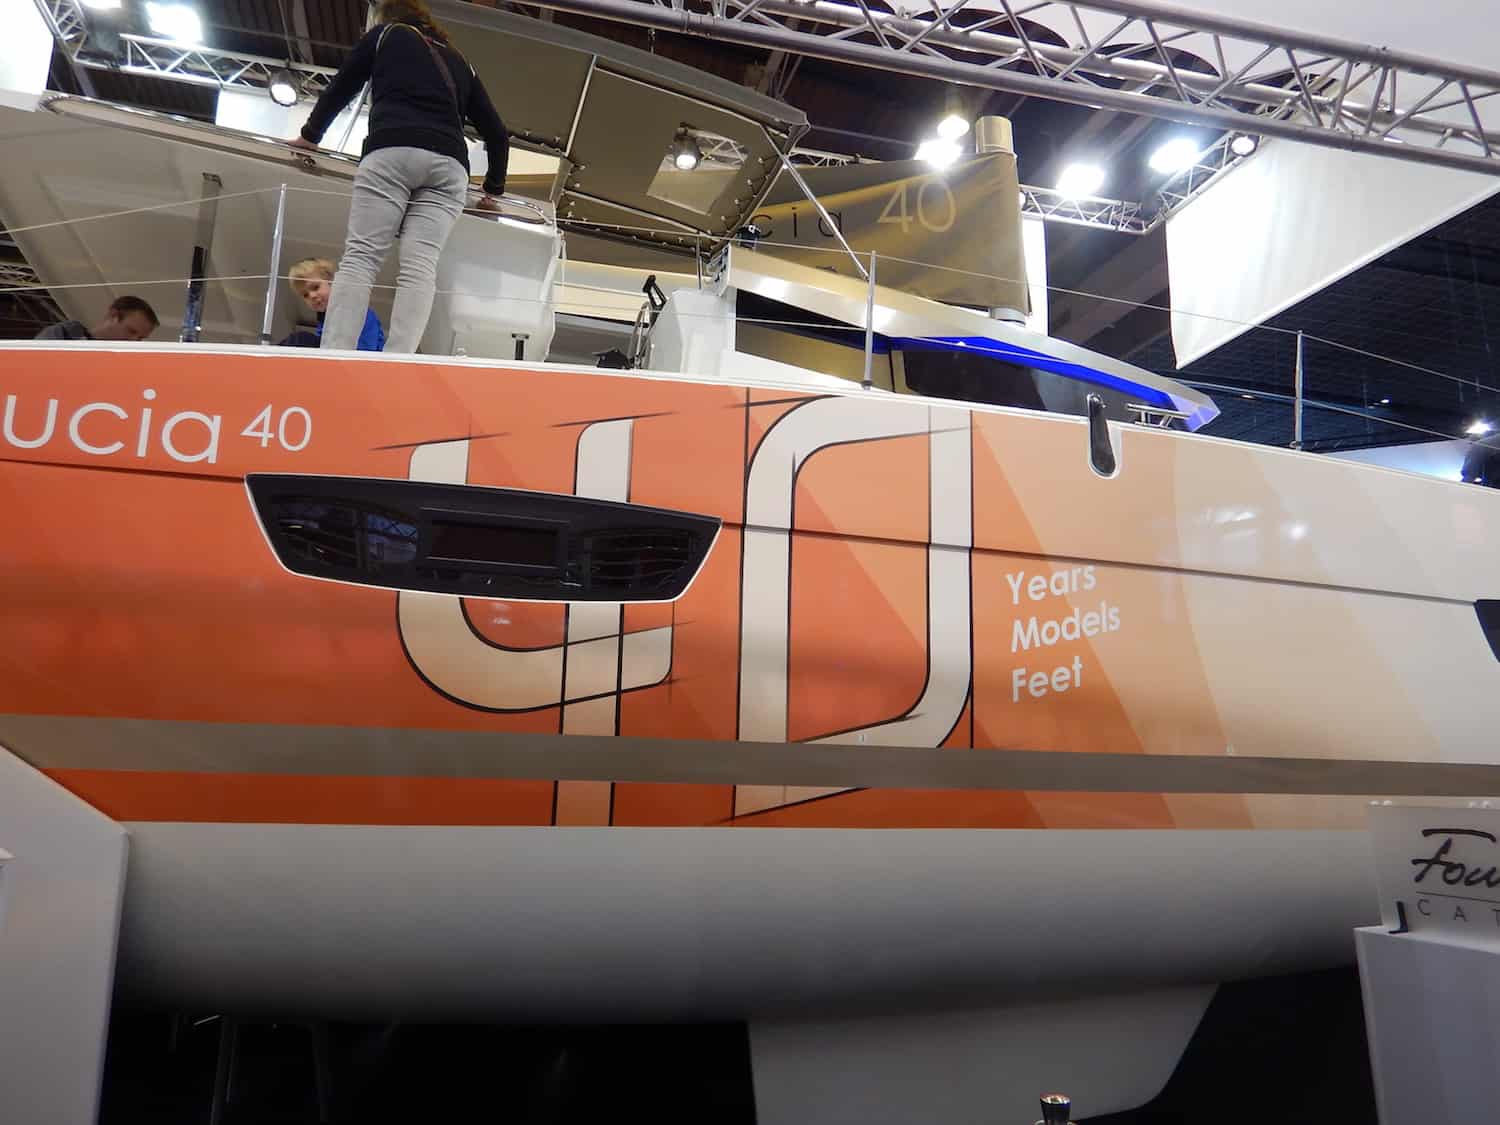 Lucia 40 hull at the paris show in 2015